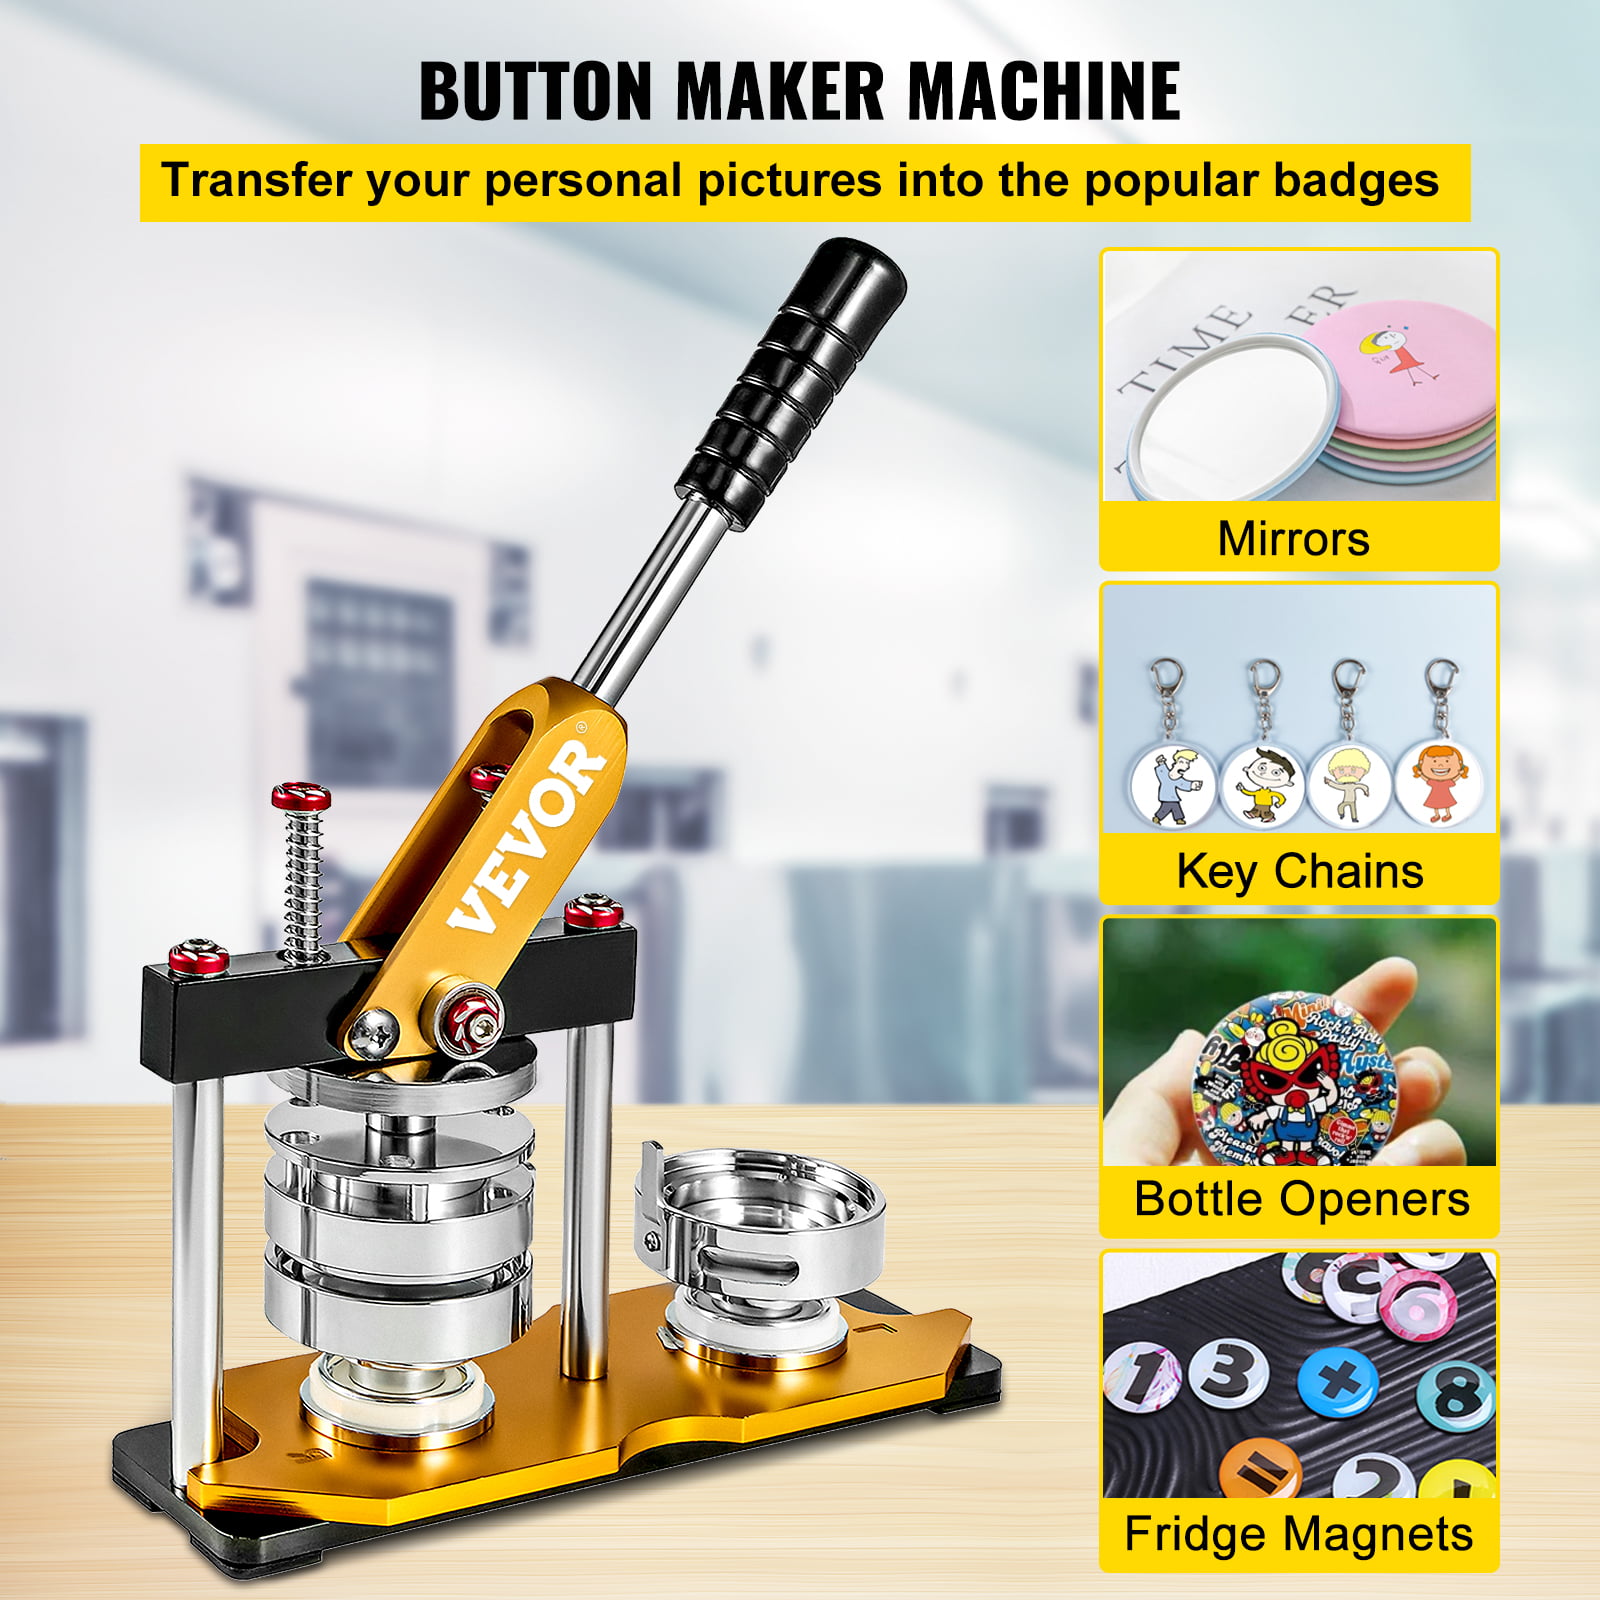  Tigoola Button Maker Machine,25mm(1 inch) Pin Maker  Machine,Button Press Machine,Badge Press Machine,Craft Gifts for Kids with  Free Button Supplies